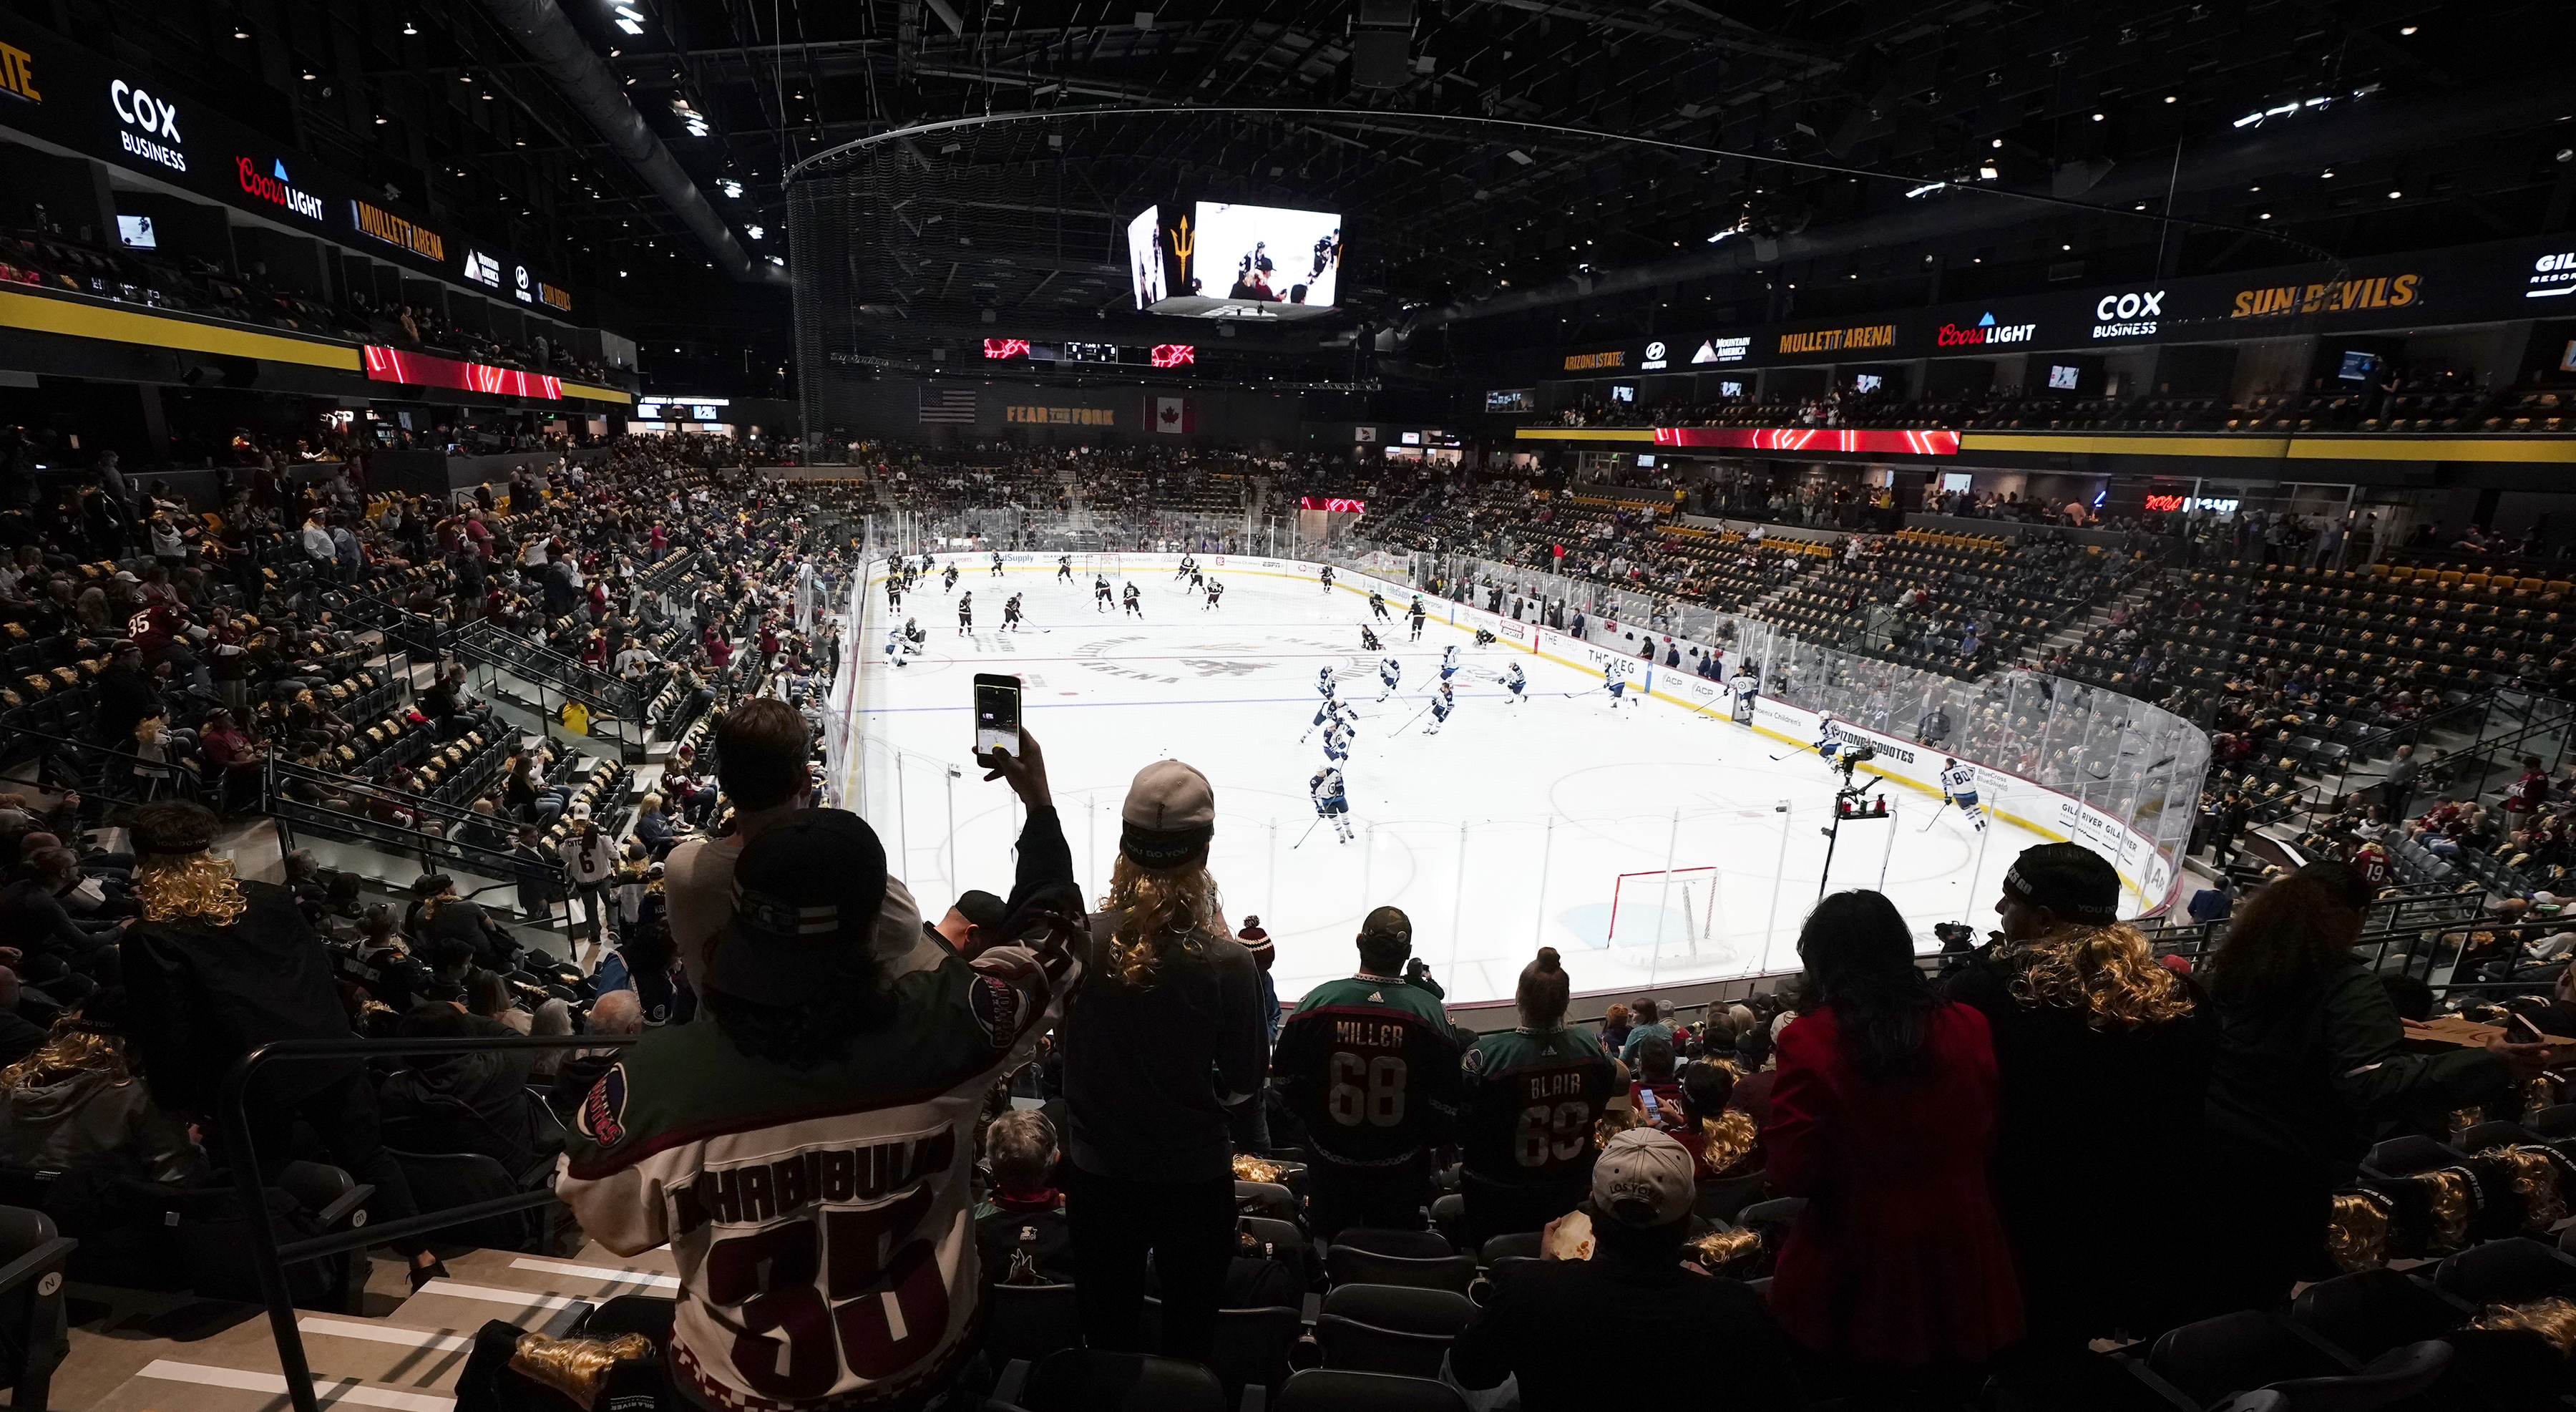 Arizona Coyotes owner intends to buy land in Mesa for possible sports arena